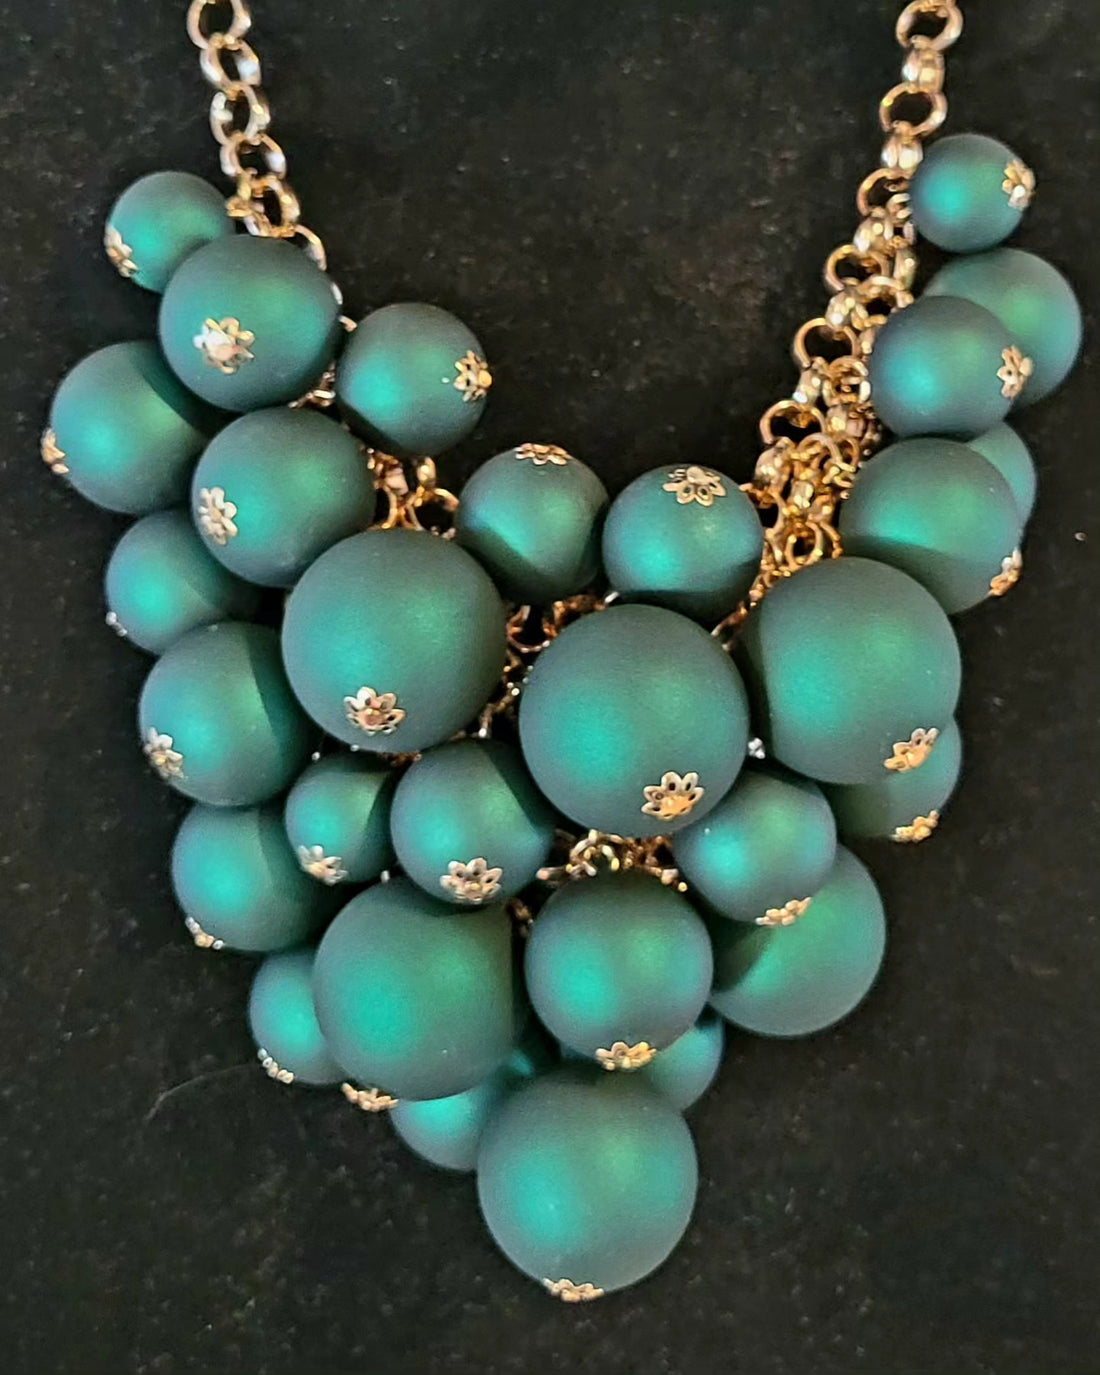 gold tone statement necklace with linked chain, teal multi size balls as focal point and matching earrings